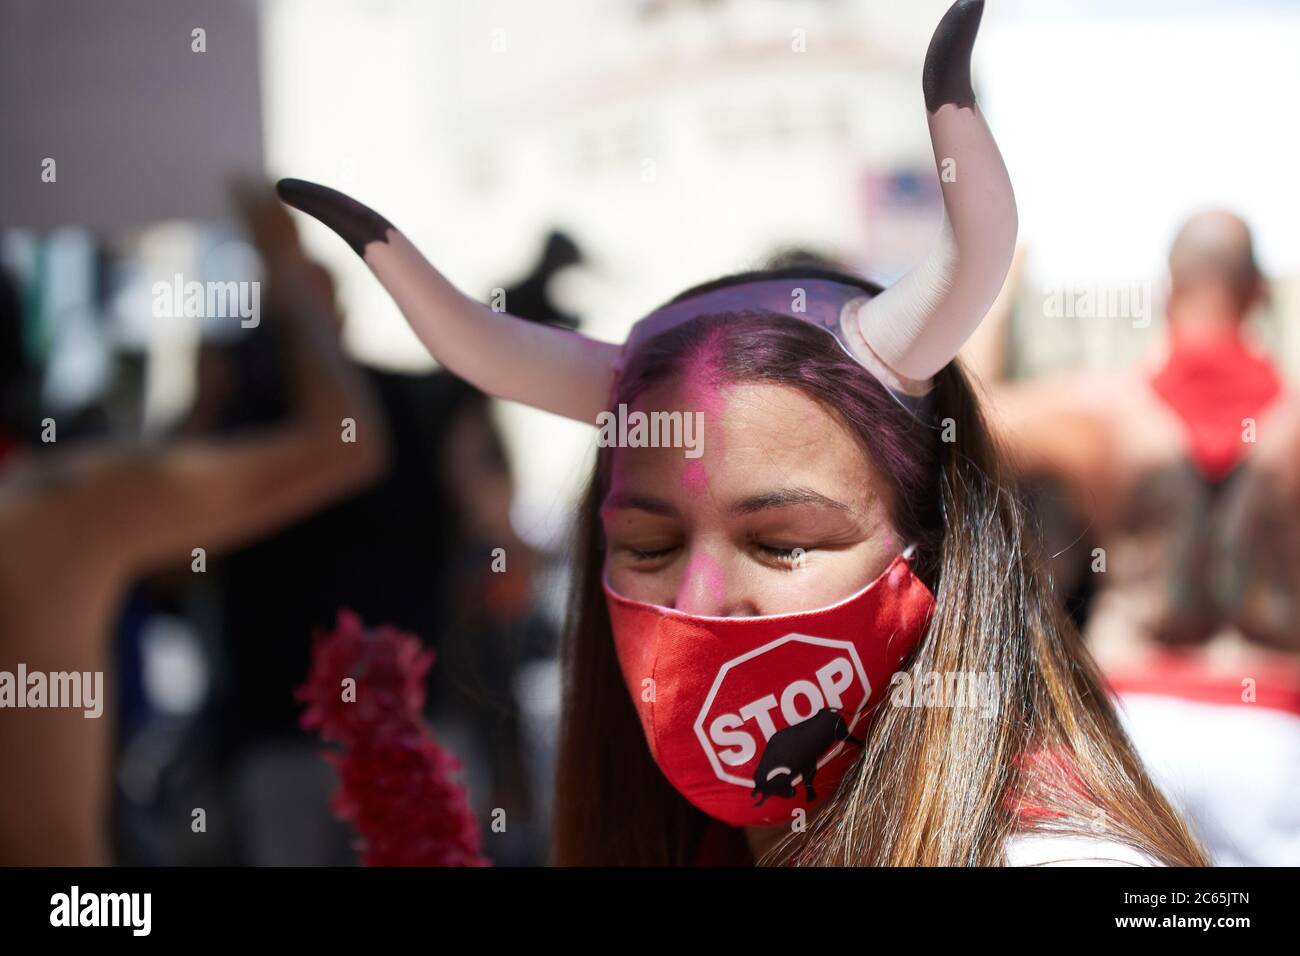 Pamplona. Spain. 7th Jul, 2020. Activists of the PETA and AnimaNaturalis collectives protest on the descent to the alley of the bullring in Pamplona to demand an end to the bullfights in Sanfermines, suspended this year due to the Covid-19 pandemic. Credit: Iñigo Alzugaray/Alamy Live News Stock Photo